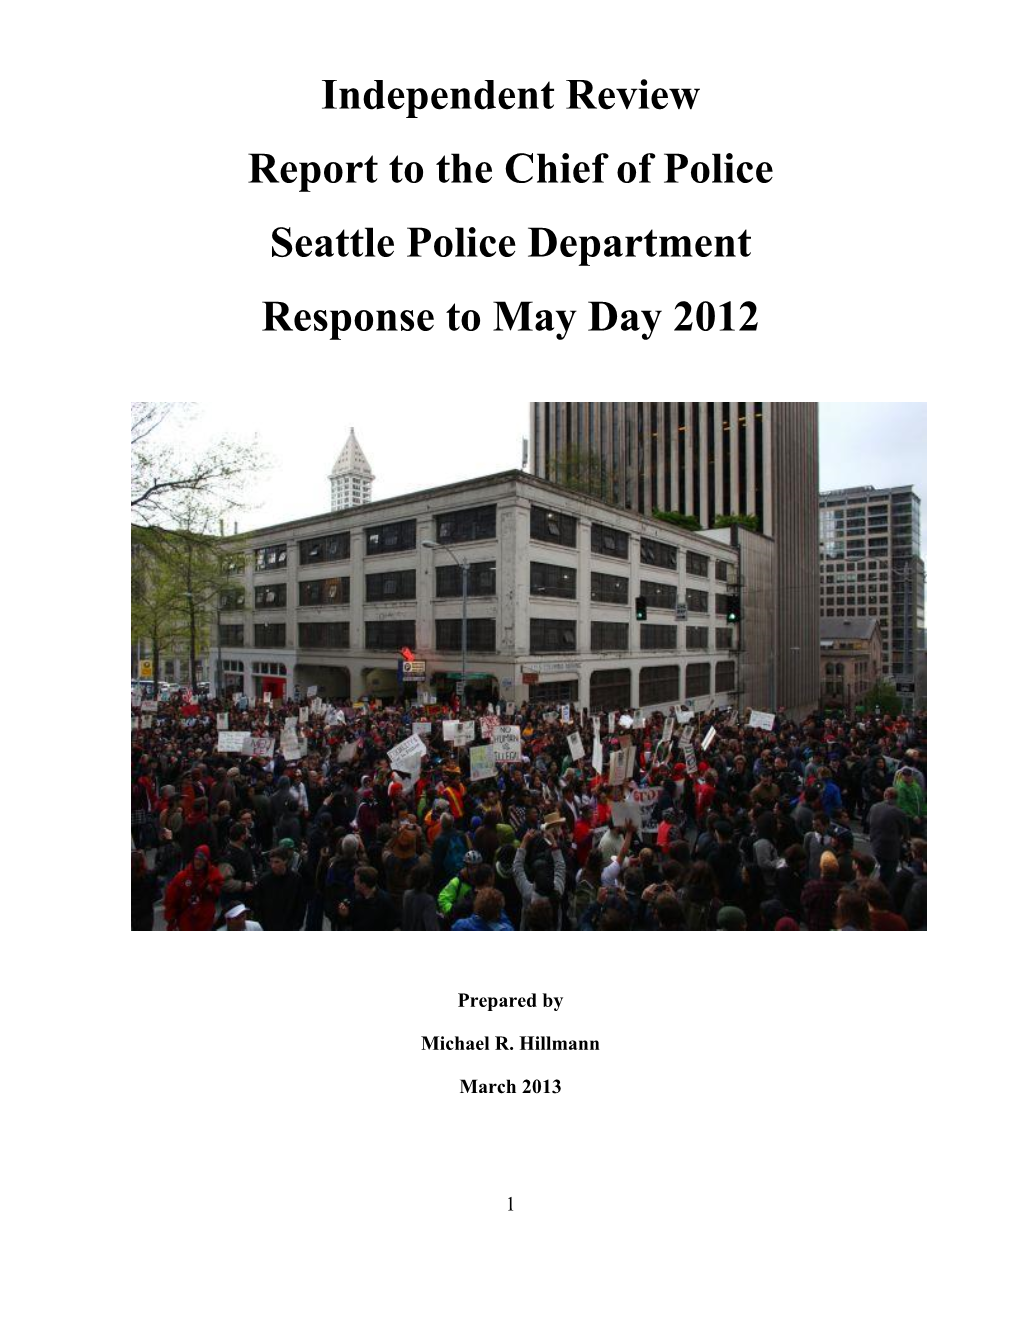 Independent Review Report to the Chief of Police Seattle Police Department Response to May Day 2012